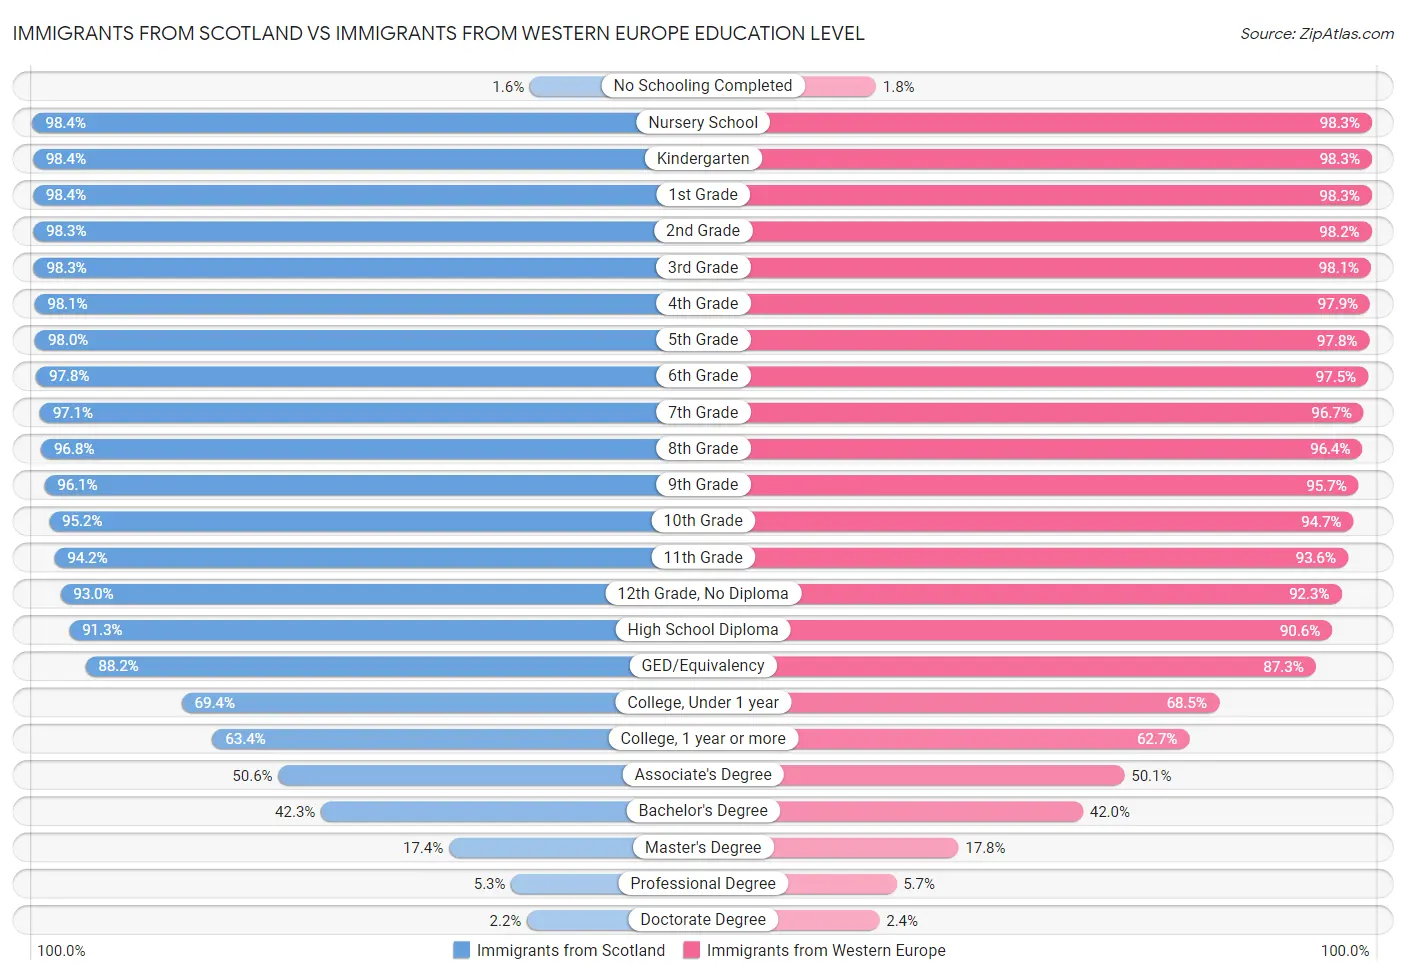 Immigrants from Scotland vs Immigrants from Western Europe Education Level